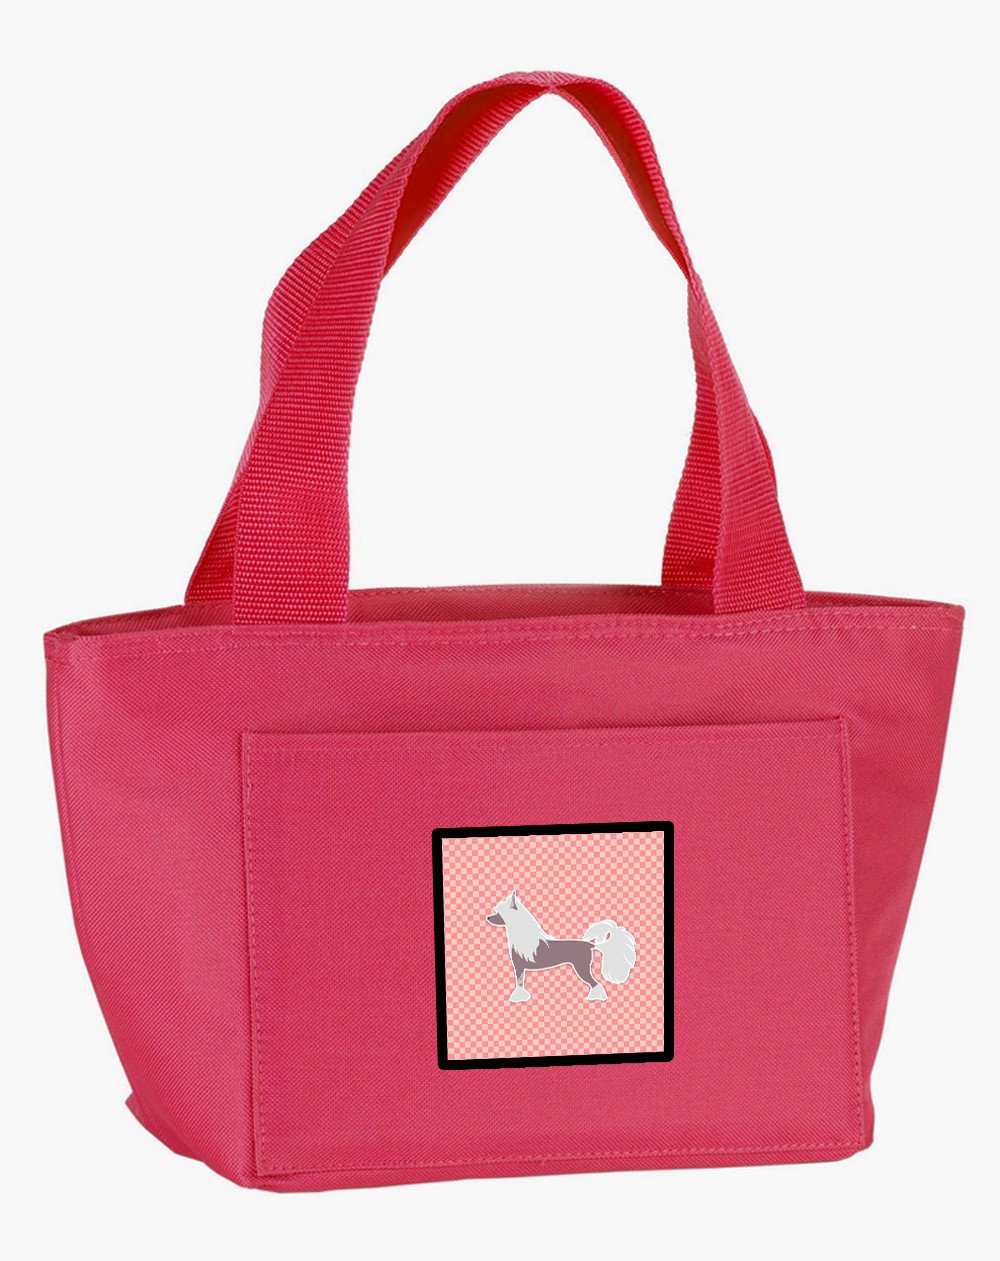 Chinese Crested Checkerboard Pink Lunch Bag BB3643PK-8808 by Caroline's Treasures